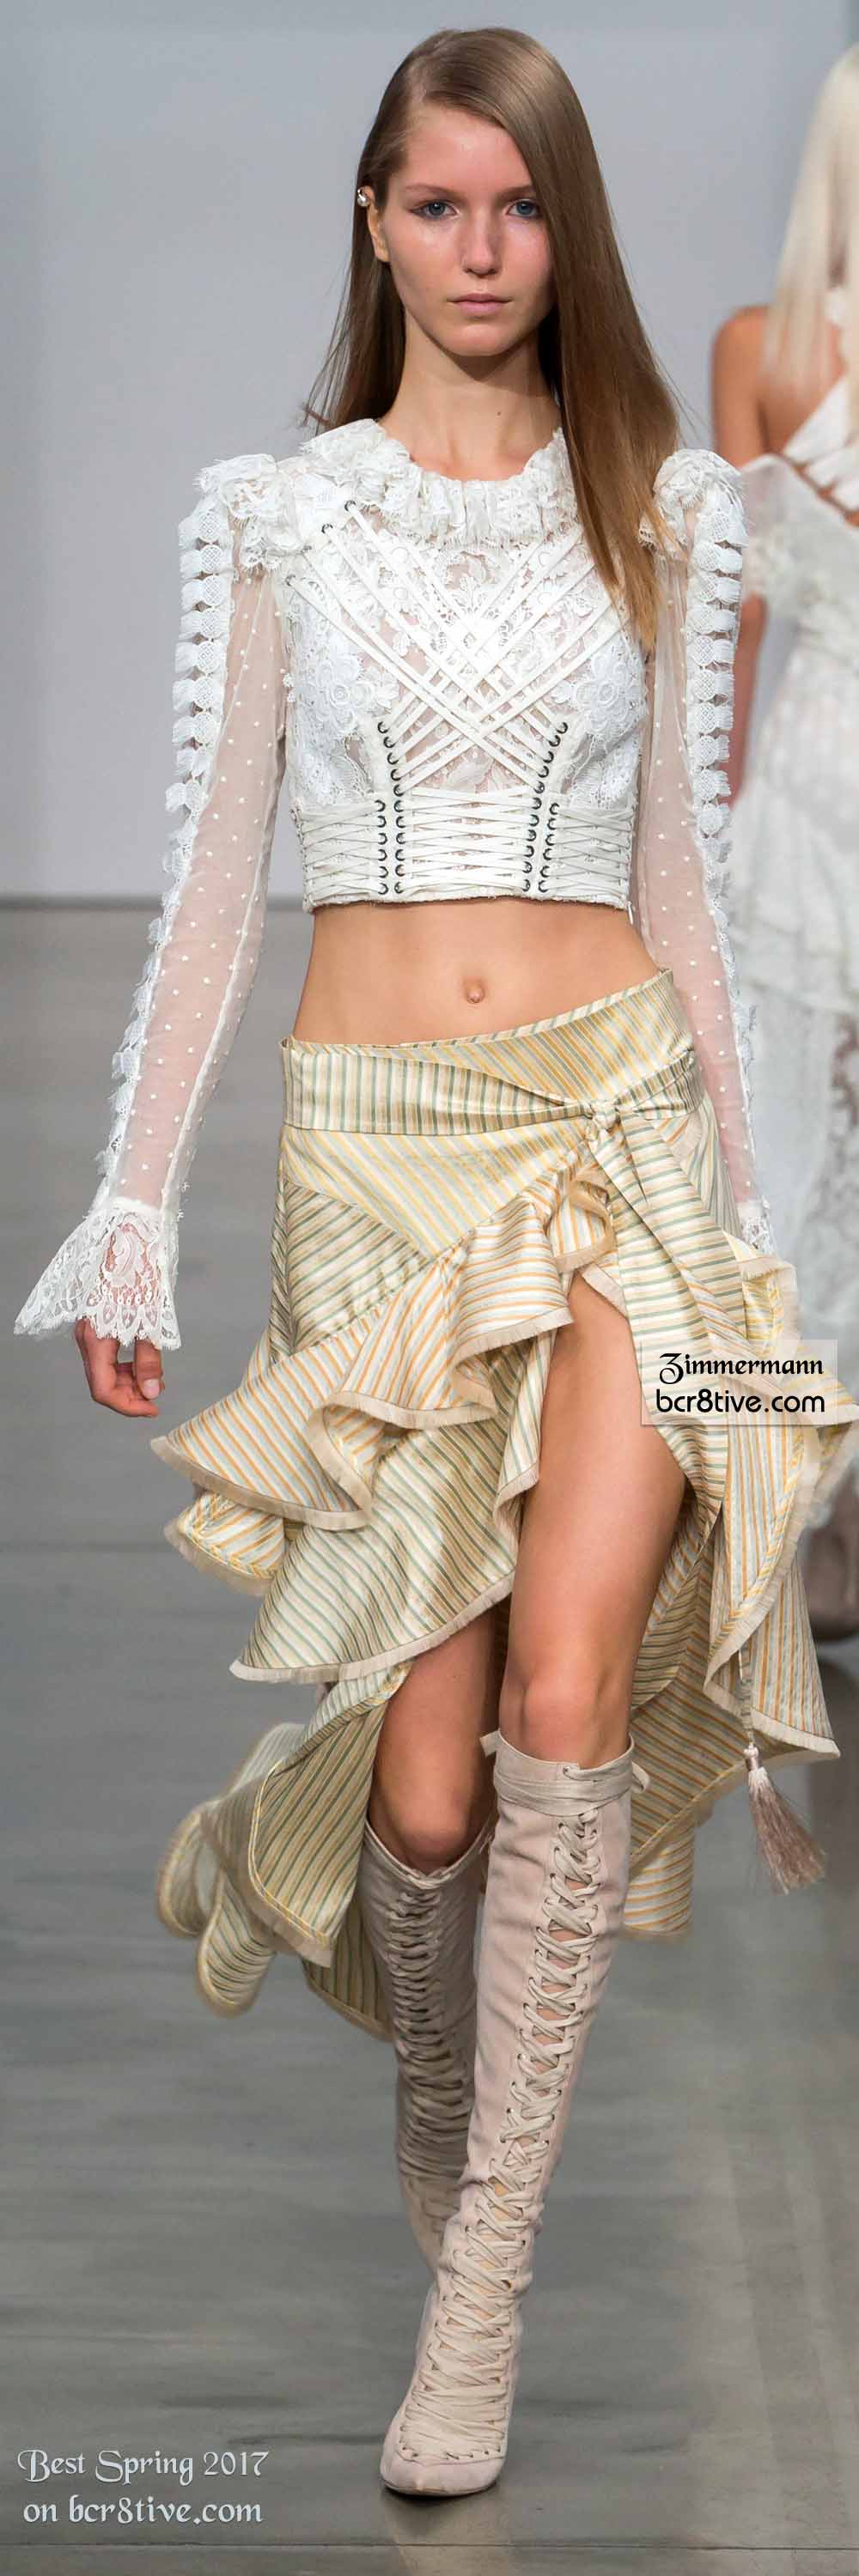 Zimmermann - The Best Looks from New York Fashion Week Spring 2017